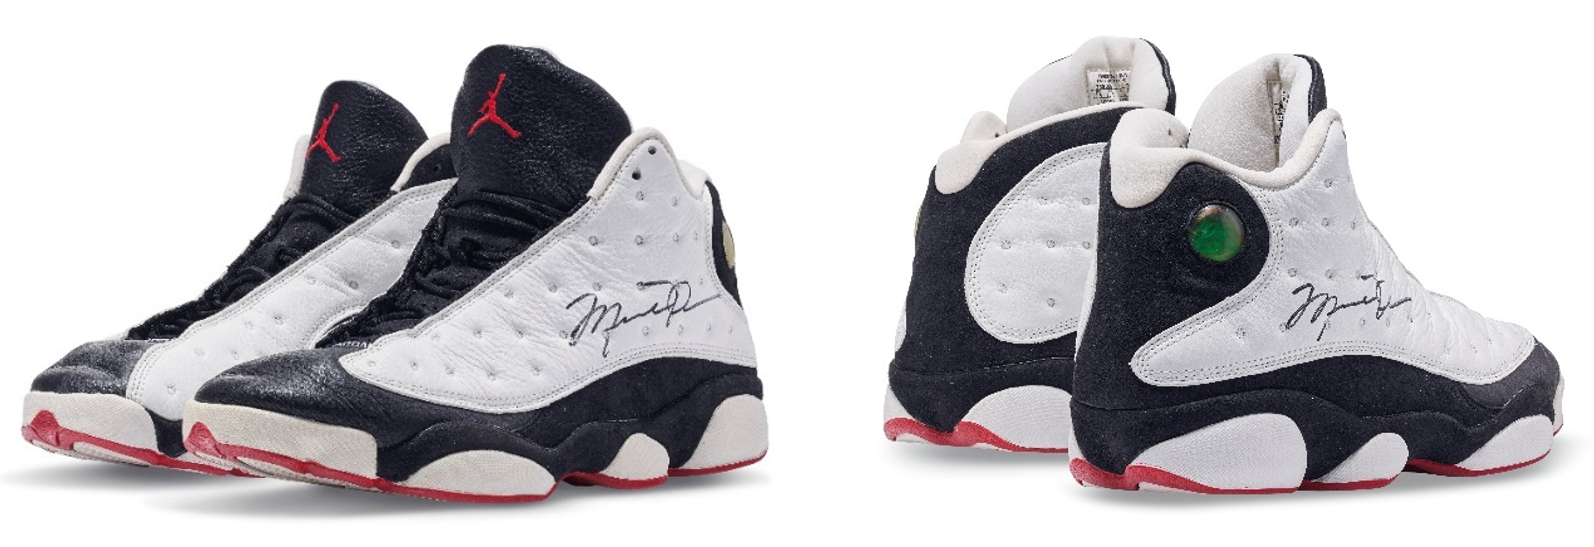 Christie's to auction Michael Jordan game-worn, dual-signed and photo-matched Air Jordan 